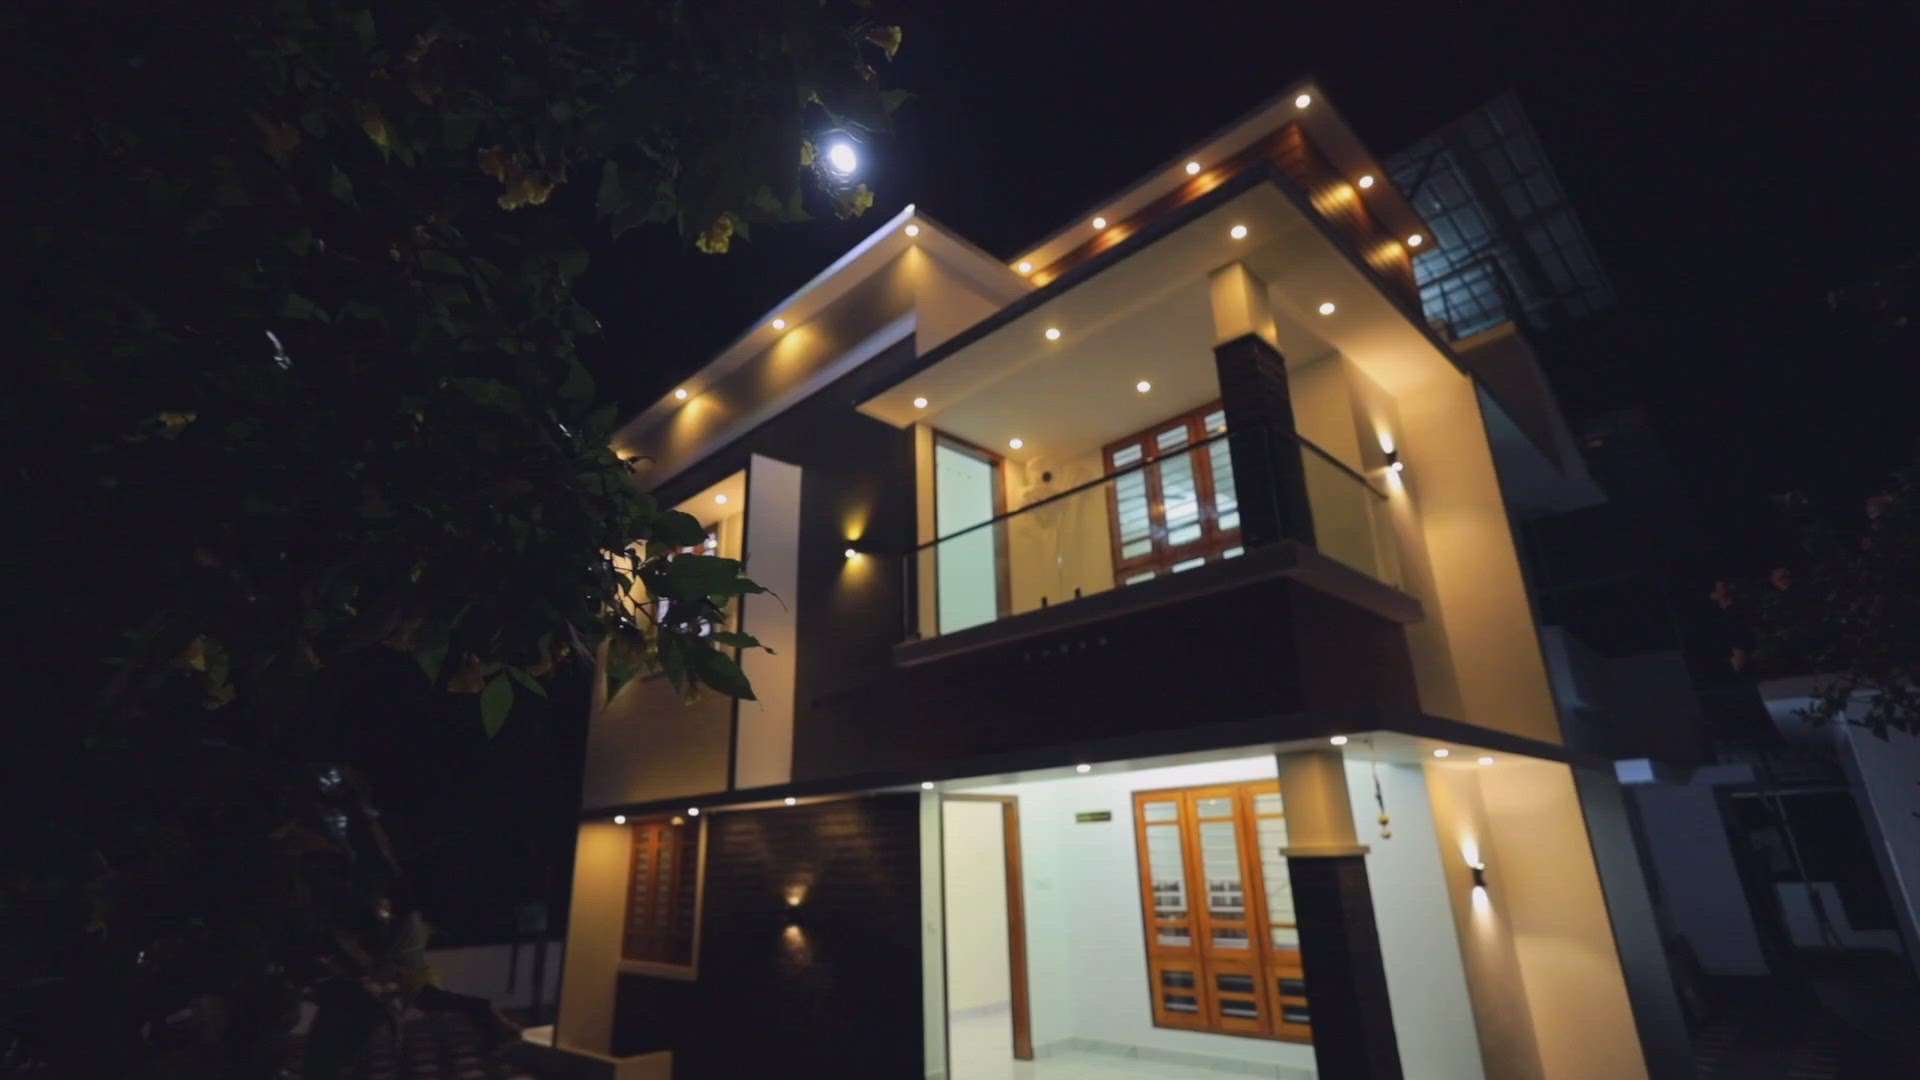 All Glory to the Almighty god
AL Manahal Builders and Developers Neyyattinkara,Tvm is  Successfully completed and Key handovering the Project of Mr Vishnu and Family Vattavila,Tvm 
Call or WTA 7025569477
www. almanahalbuilders.in
Follow us on : Facebook,Insta,Kolo 
Al Manahal Builders and Developers 

AL MANAHAL BUILDERS AND DEVELOPERS Neyyattinkara Tvm is the most reputed construction company in Trivandrum Kerala
We will do ultimate and branded quality construction like Homes, Commercial buildings, Shopping malls, Hospital buildings, Apartments etc we are not build a building for a few years ,we are build for a life time Our sq ft rate packages starts from 2000/- Quality branded construction is our speciality
No compromise with quality .
Design your Dream Residential or commercial building and build most wonderful place in the world at in your land with us.
Call or WTA 7025569477

#Topbuildersinkerala
#kishorkumartvm
#almanahalbuilders 
#Buildersinkerala
#simplehomes
#completed_house